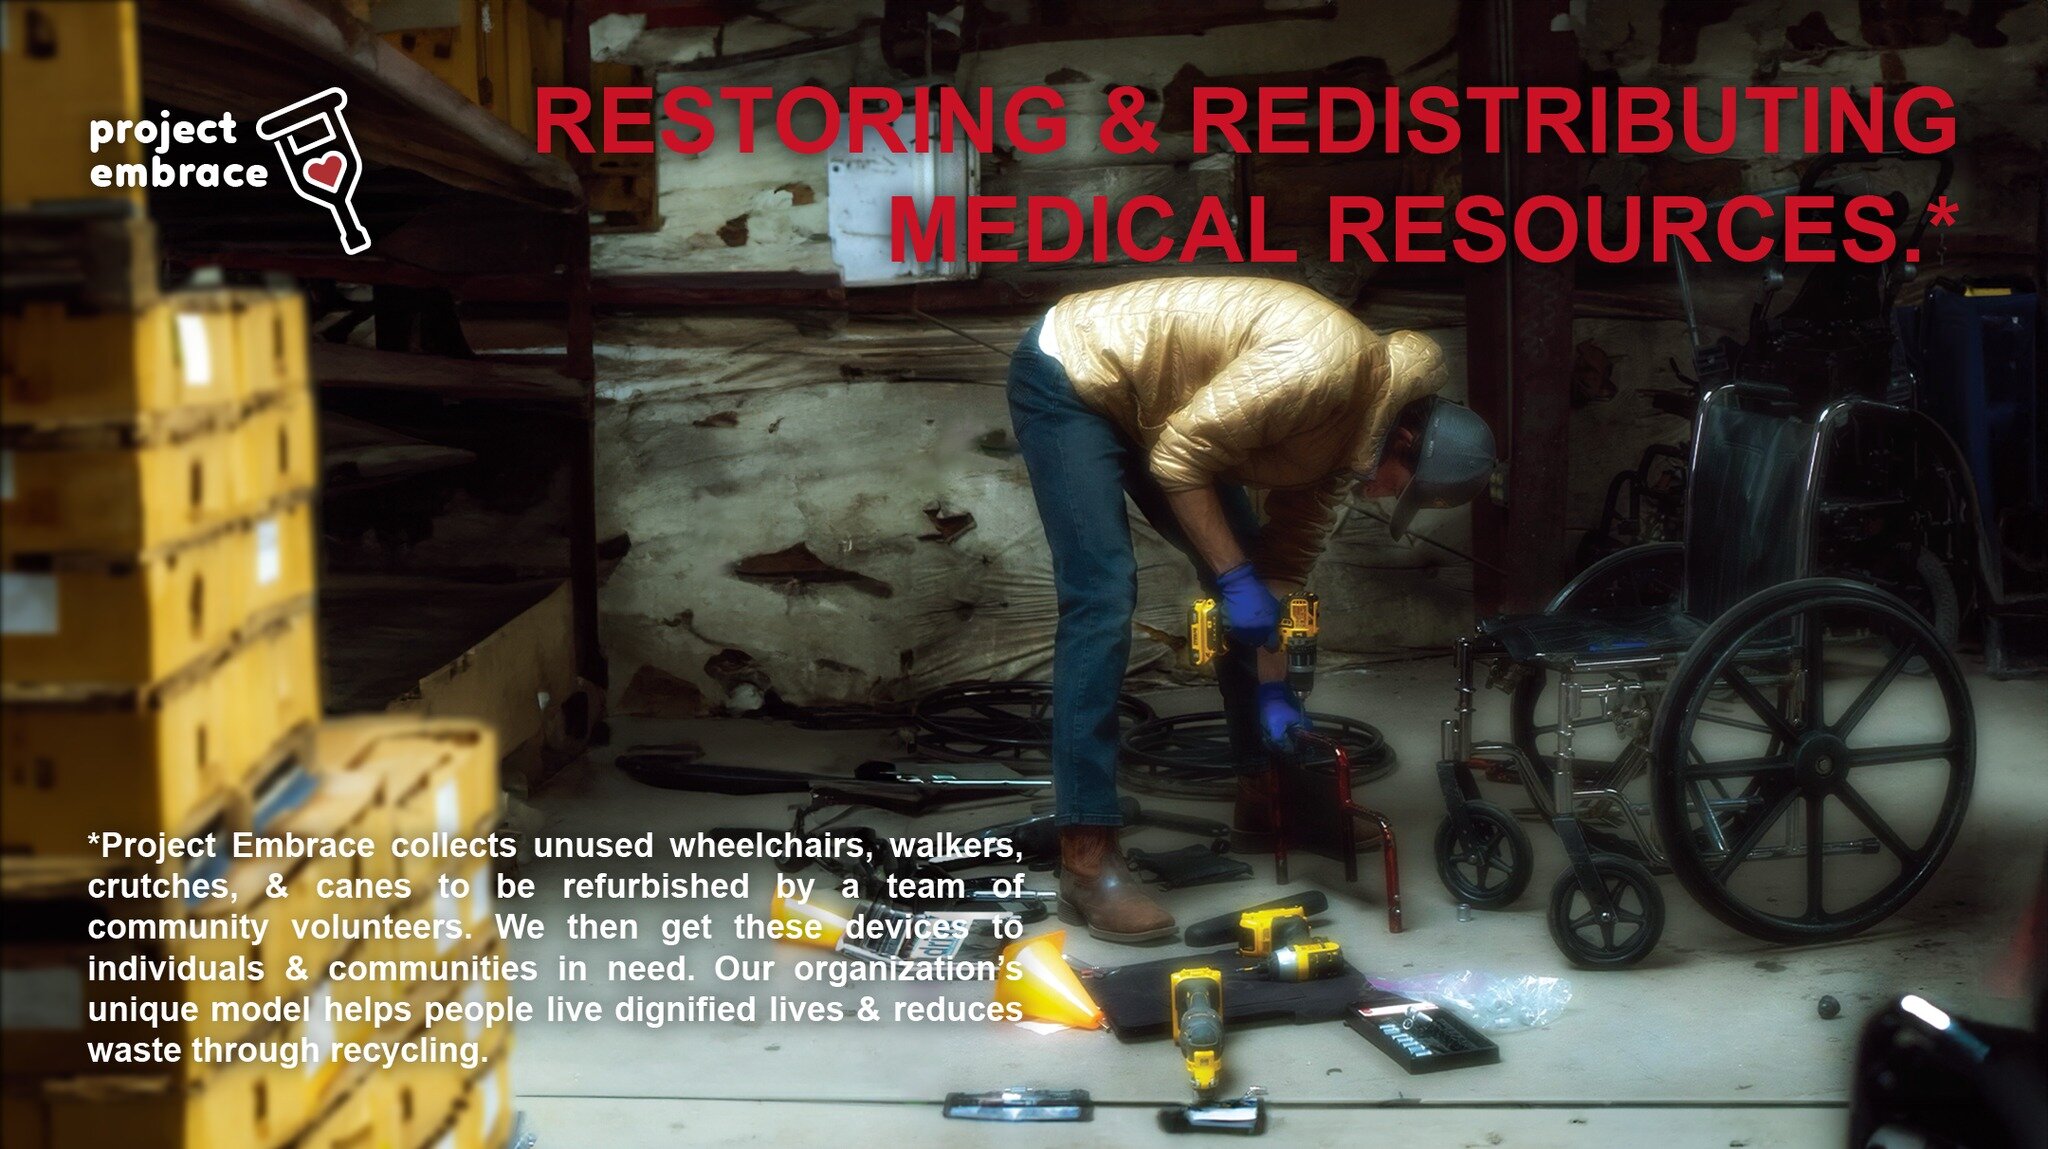 RESTORING &amp; REDISTRIBUTING MEDICAL RESOURCES.*

---

*Project Embrace collects unused wheelchairs, walkers, crutches, &amp; canes to be refurbished by a team of community volunteers. We then get these devices to individuals &amp; communities in n